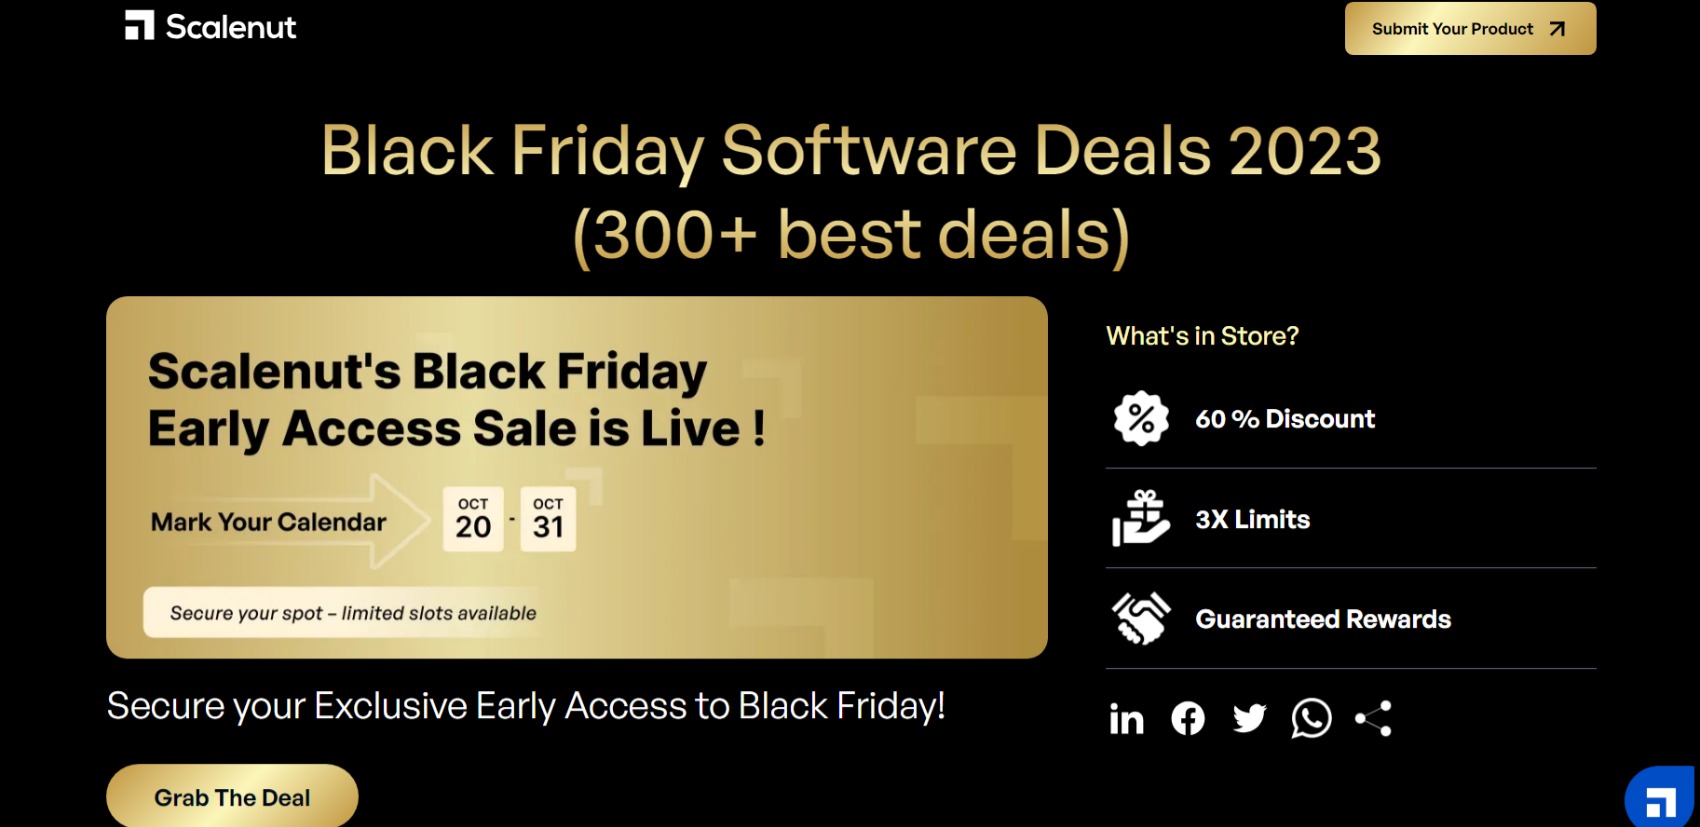 Scalenut’s Black Friday Deal